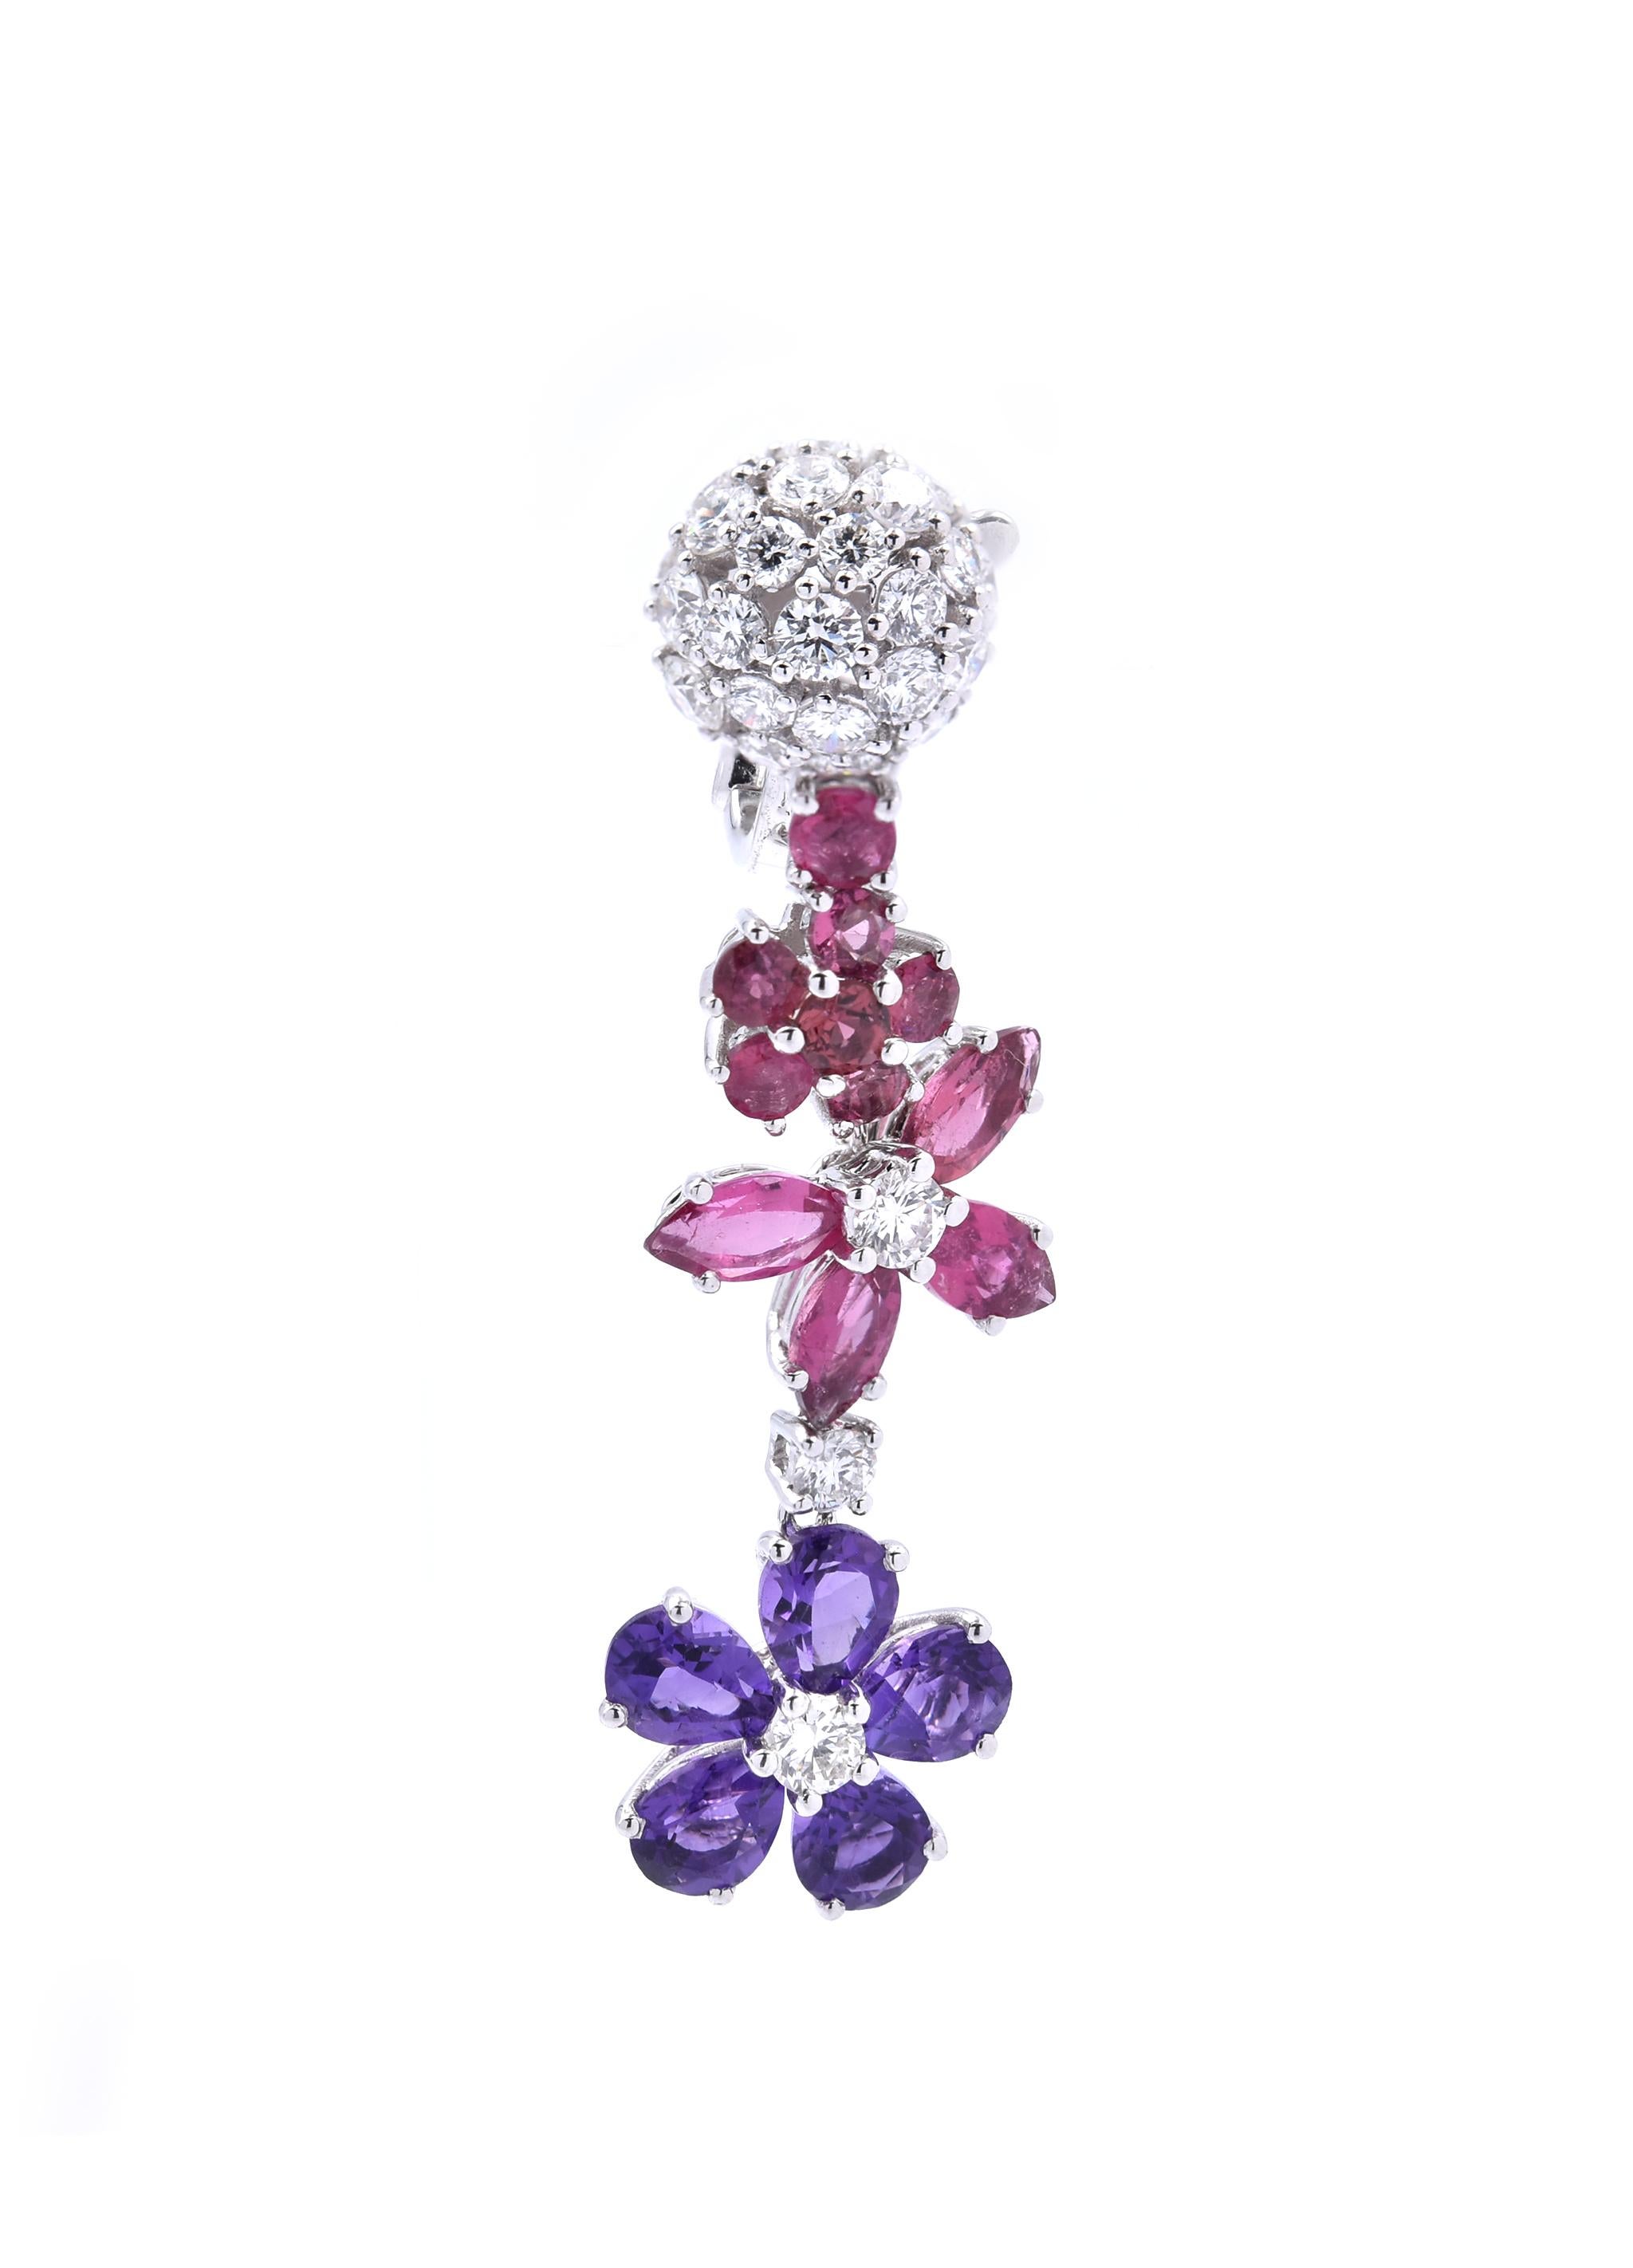 Designer: Van Cleef & Arpels
Material: 18k white gold
Sapphires: 28 mauve and pink sapphires = 6.27cttw
Diamonds: 64 round brilliant cuts = 3.16cttw
Color: G
Clarity: VS
Dimensions: earrings measure 41.80mm x 11.70mm
Fastenings: post with omega